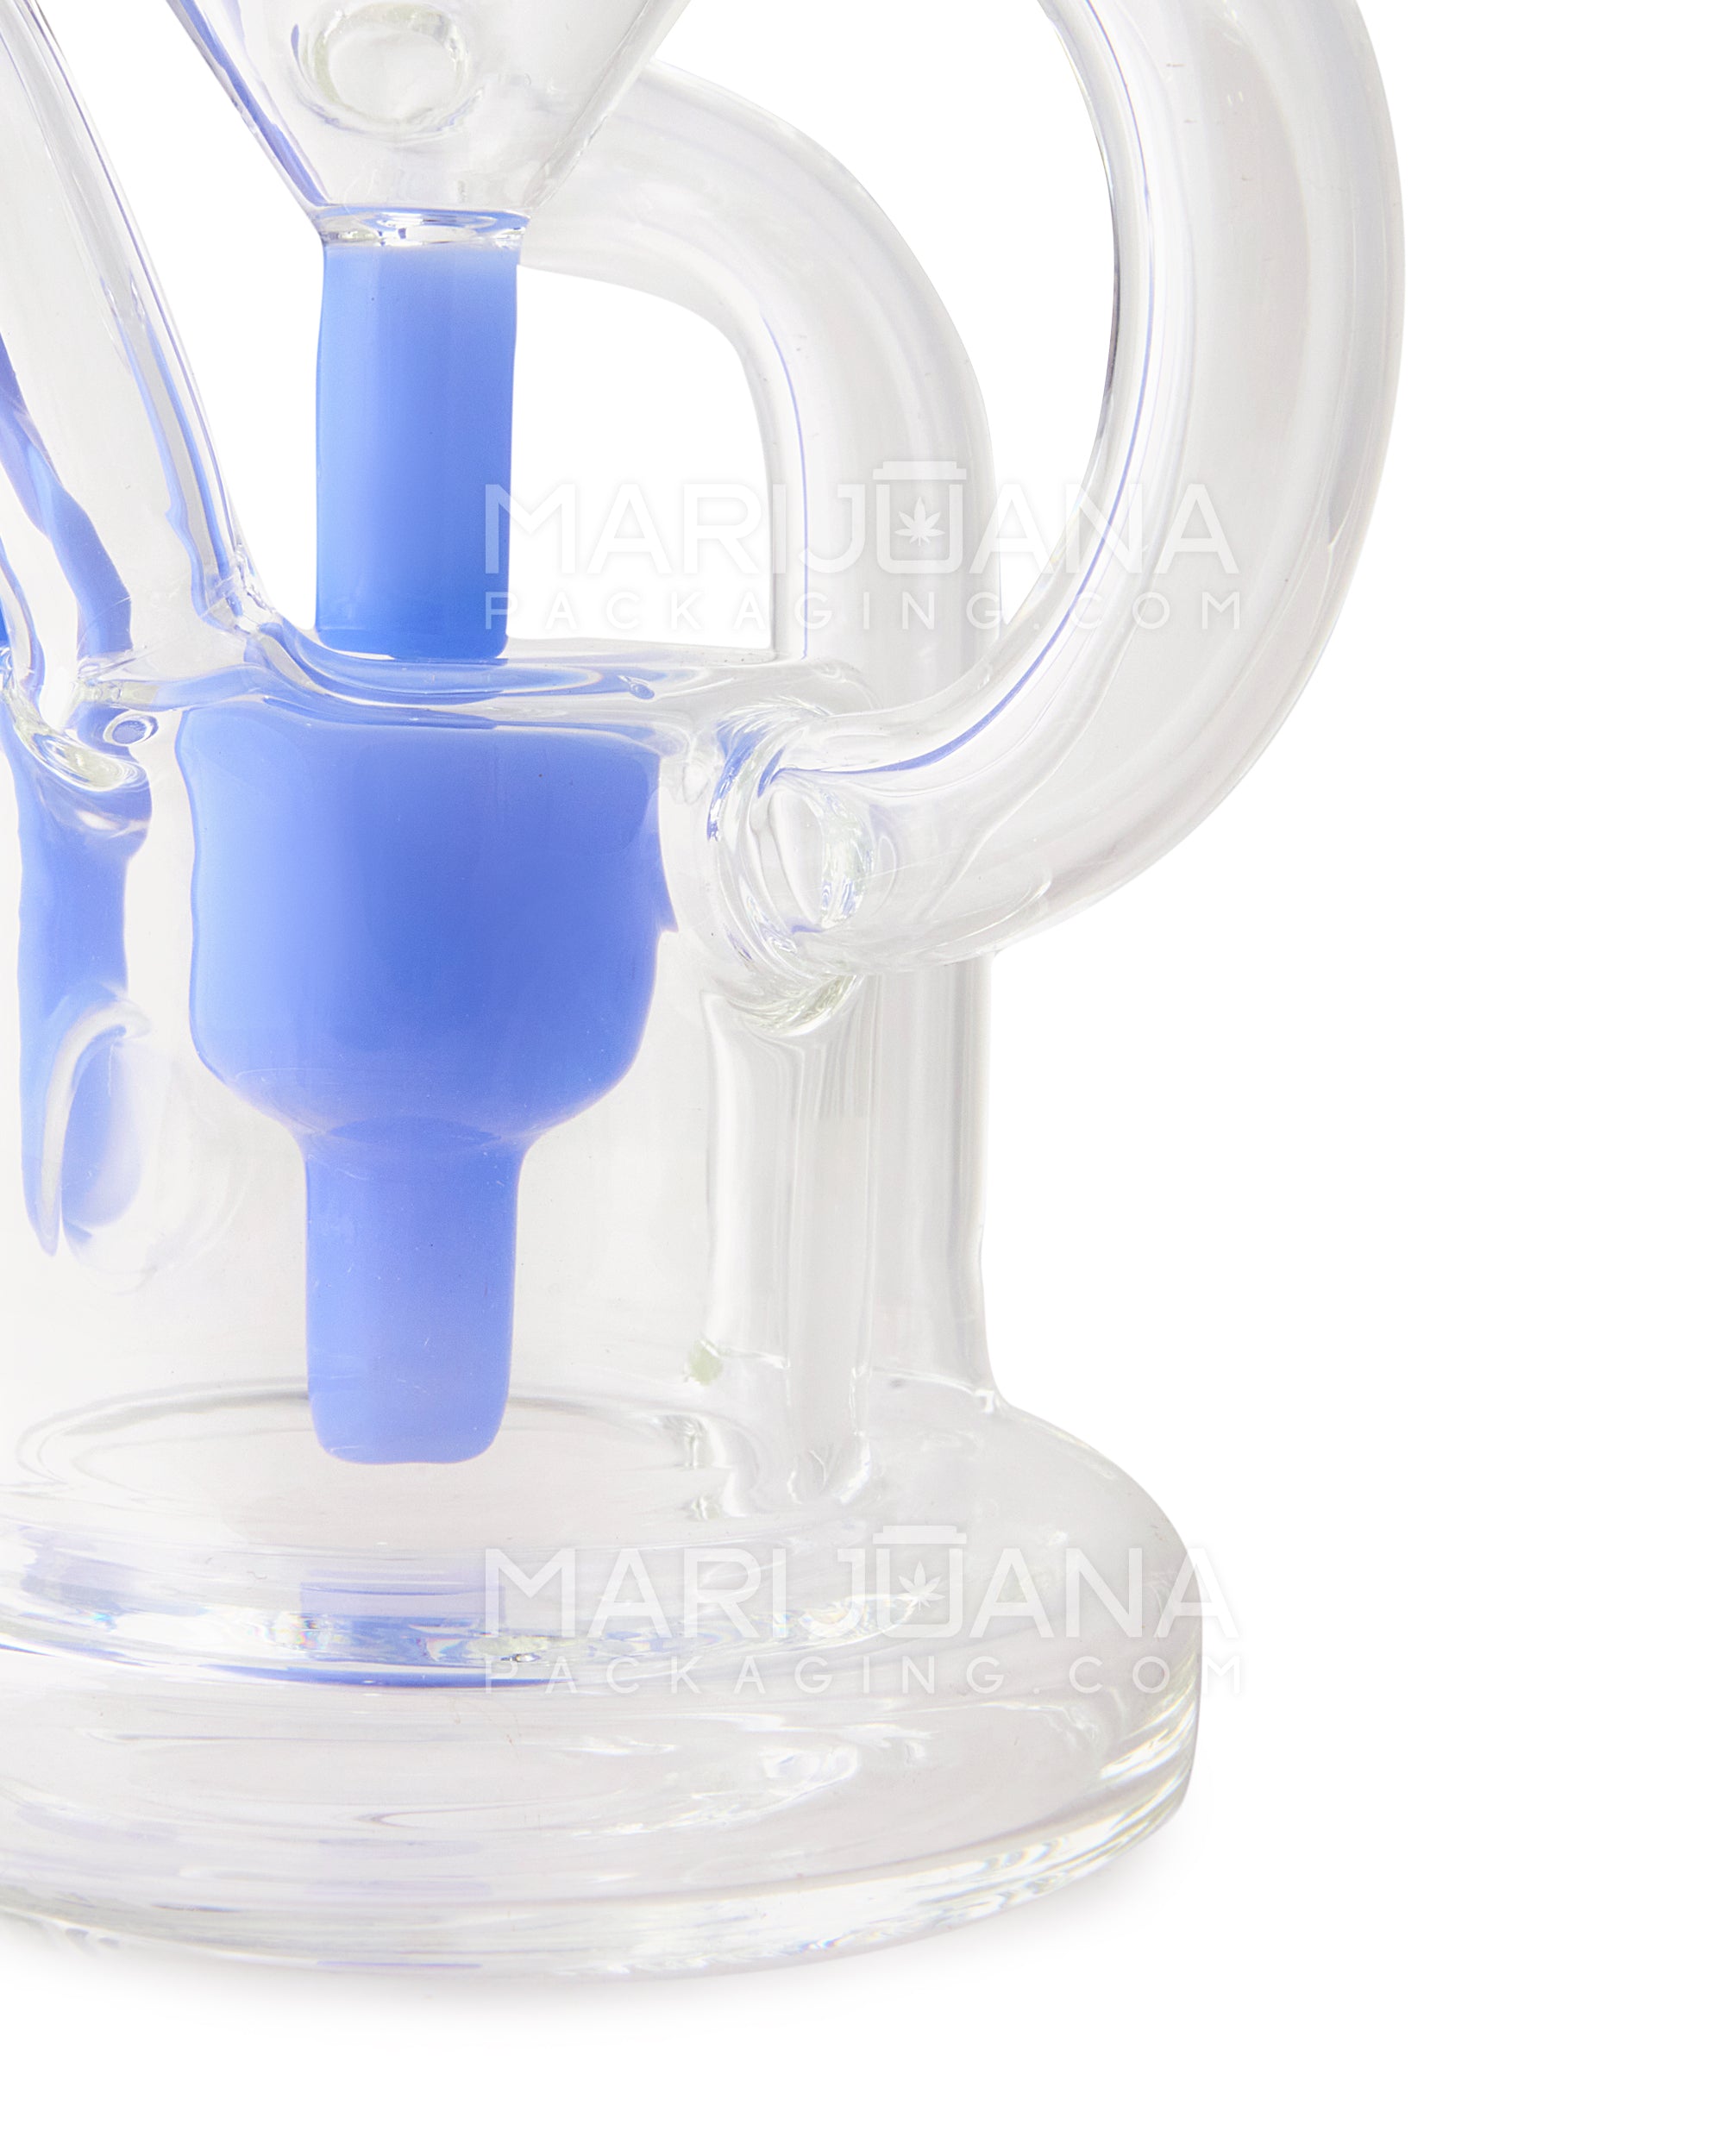 USA Glass | Sidecar Funnel Single Uptake Ball Water Pipe | 6.5in Tall - 14mm Bowl - Blue